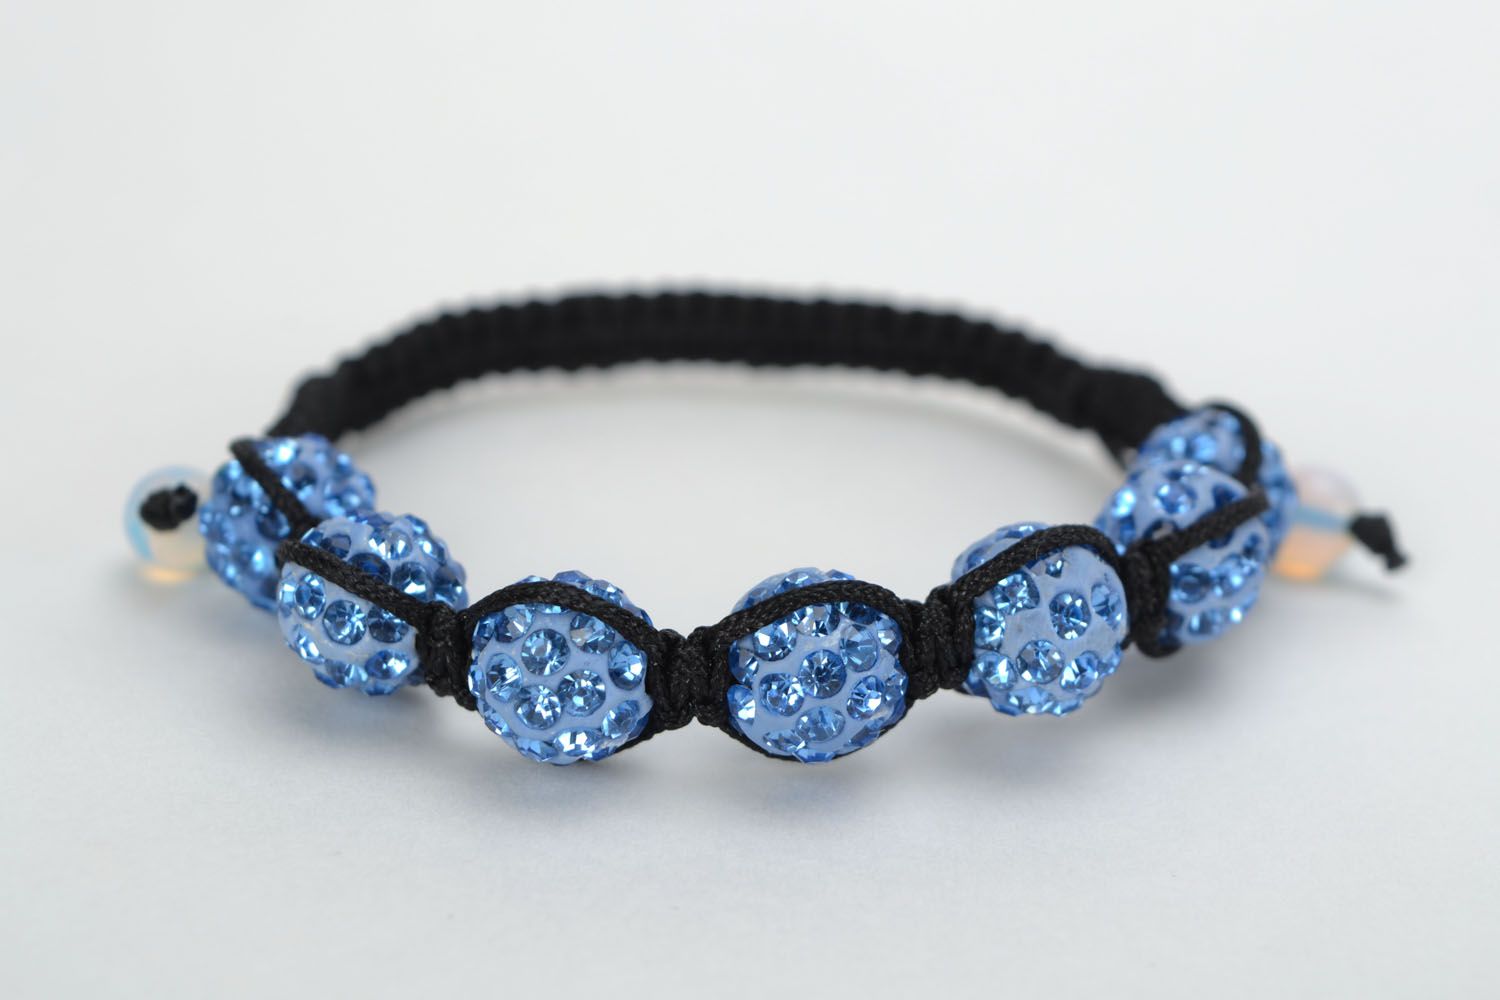 Bracelet made of blue beads and cord photo 4